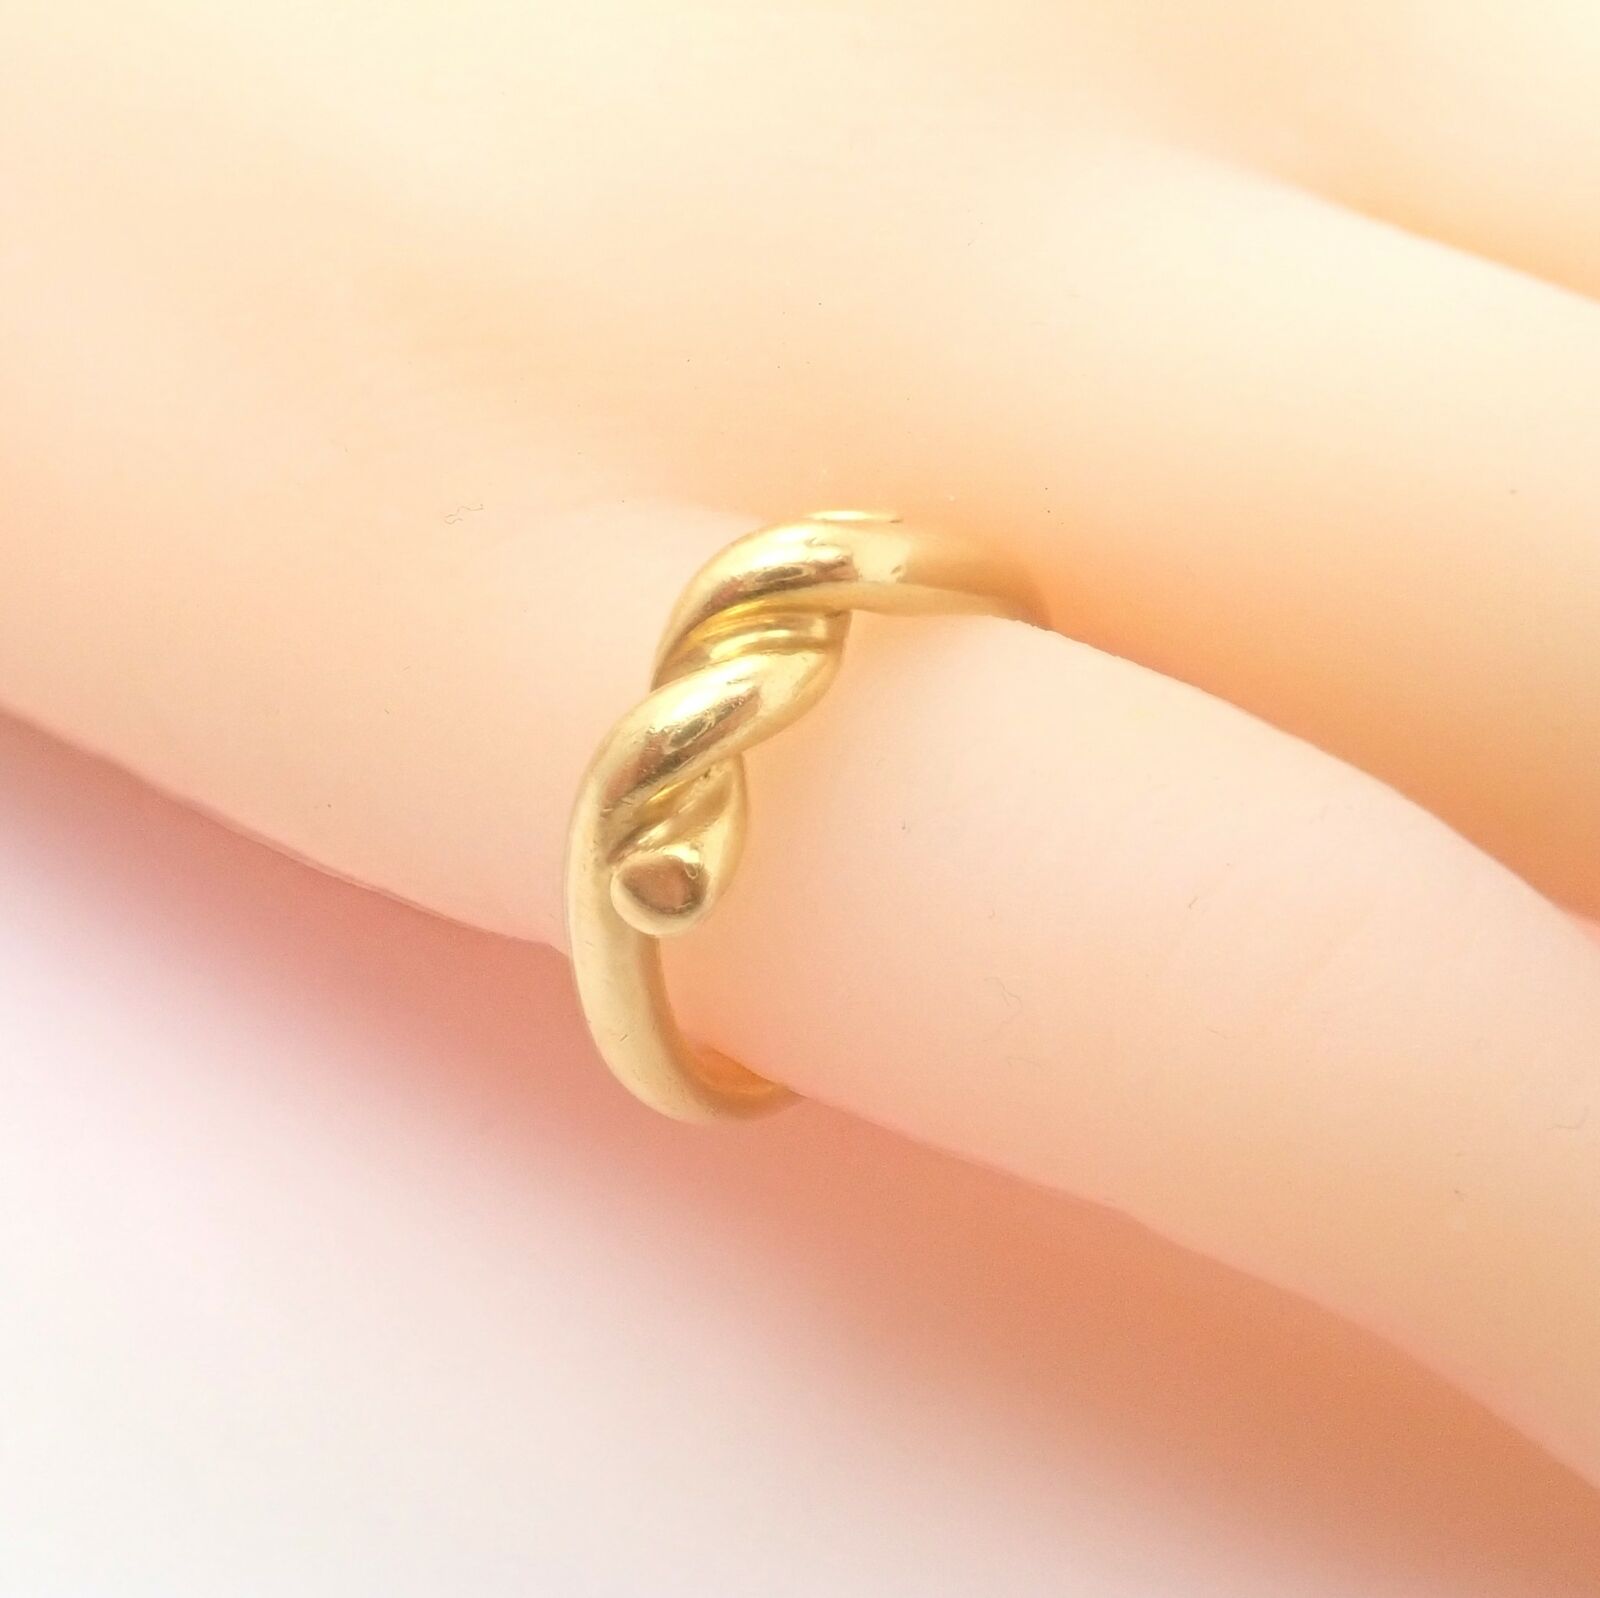 Tiffany & Co. Jewelry & Watches:Fine Jewelry:Rings Tiffany & Co 18k Yellow Gold Knot Ring Sz 6